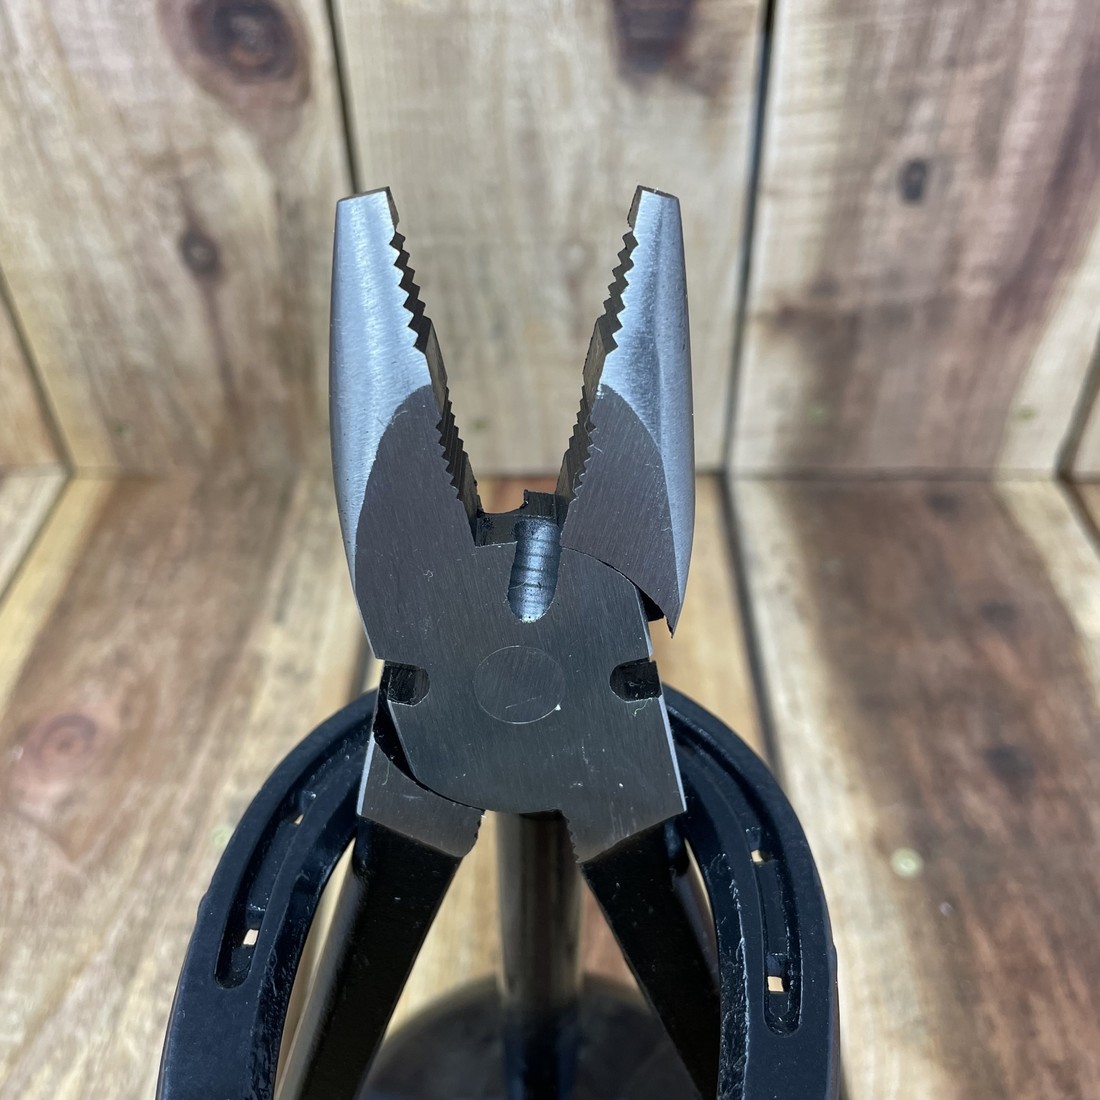 Round Nose Pliers - Intercable